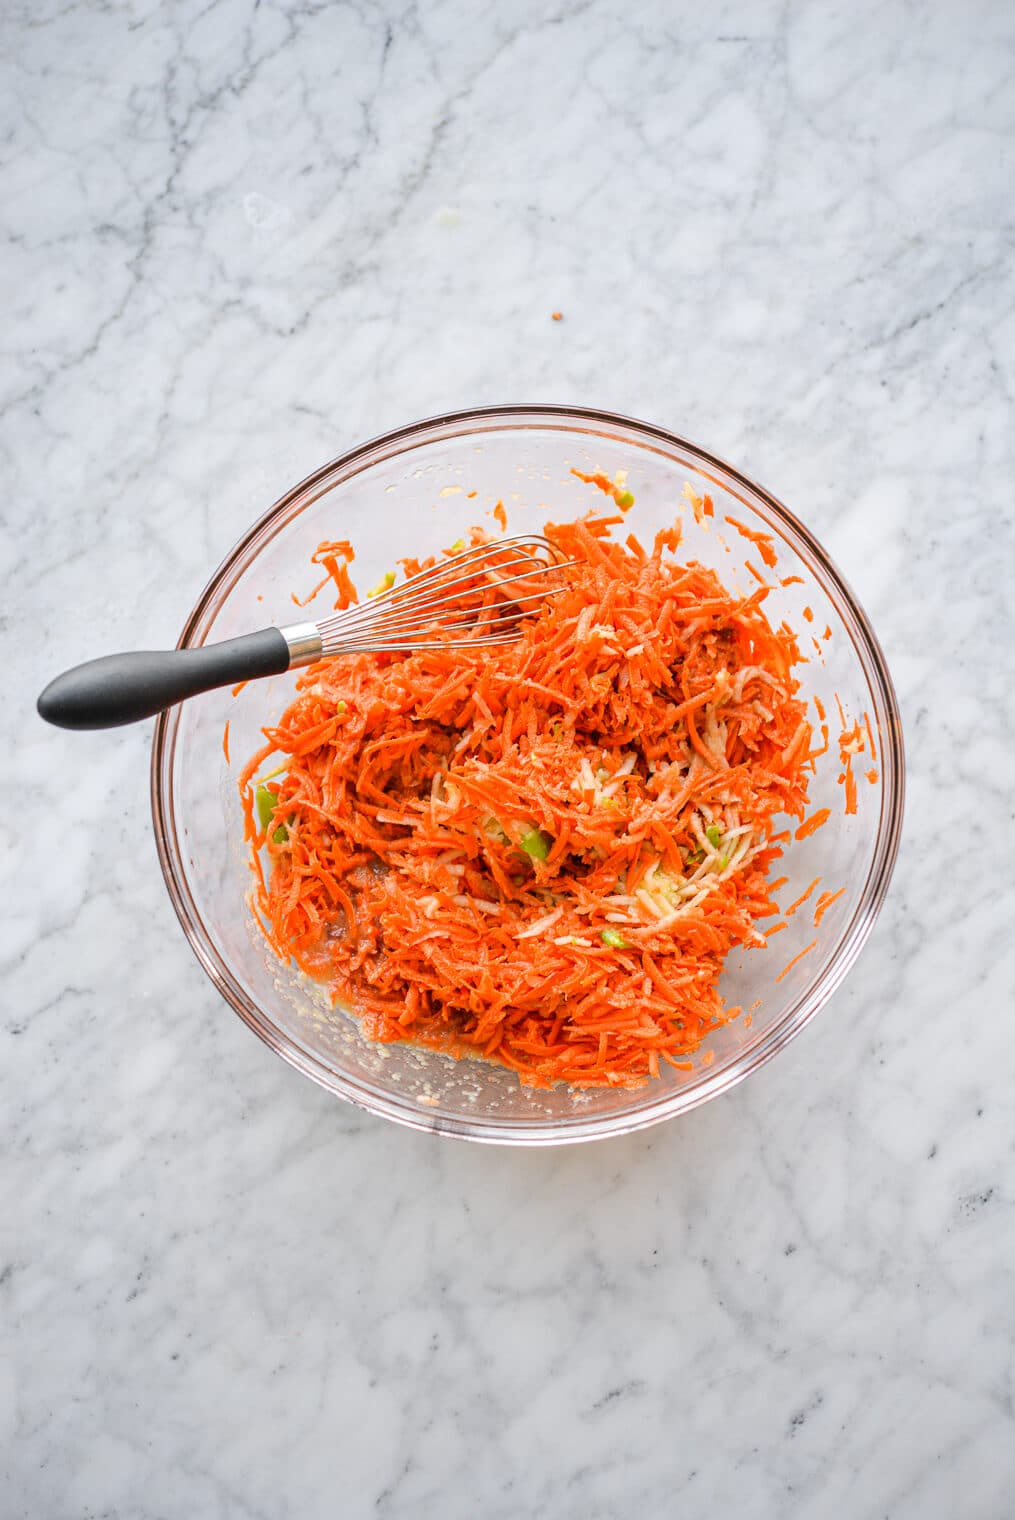 shredded carrots and apples in a large glass mixing bowl